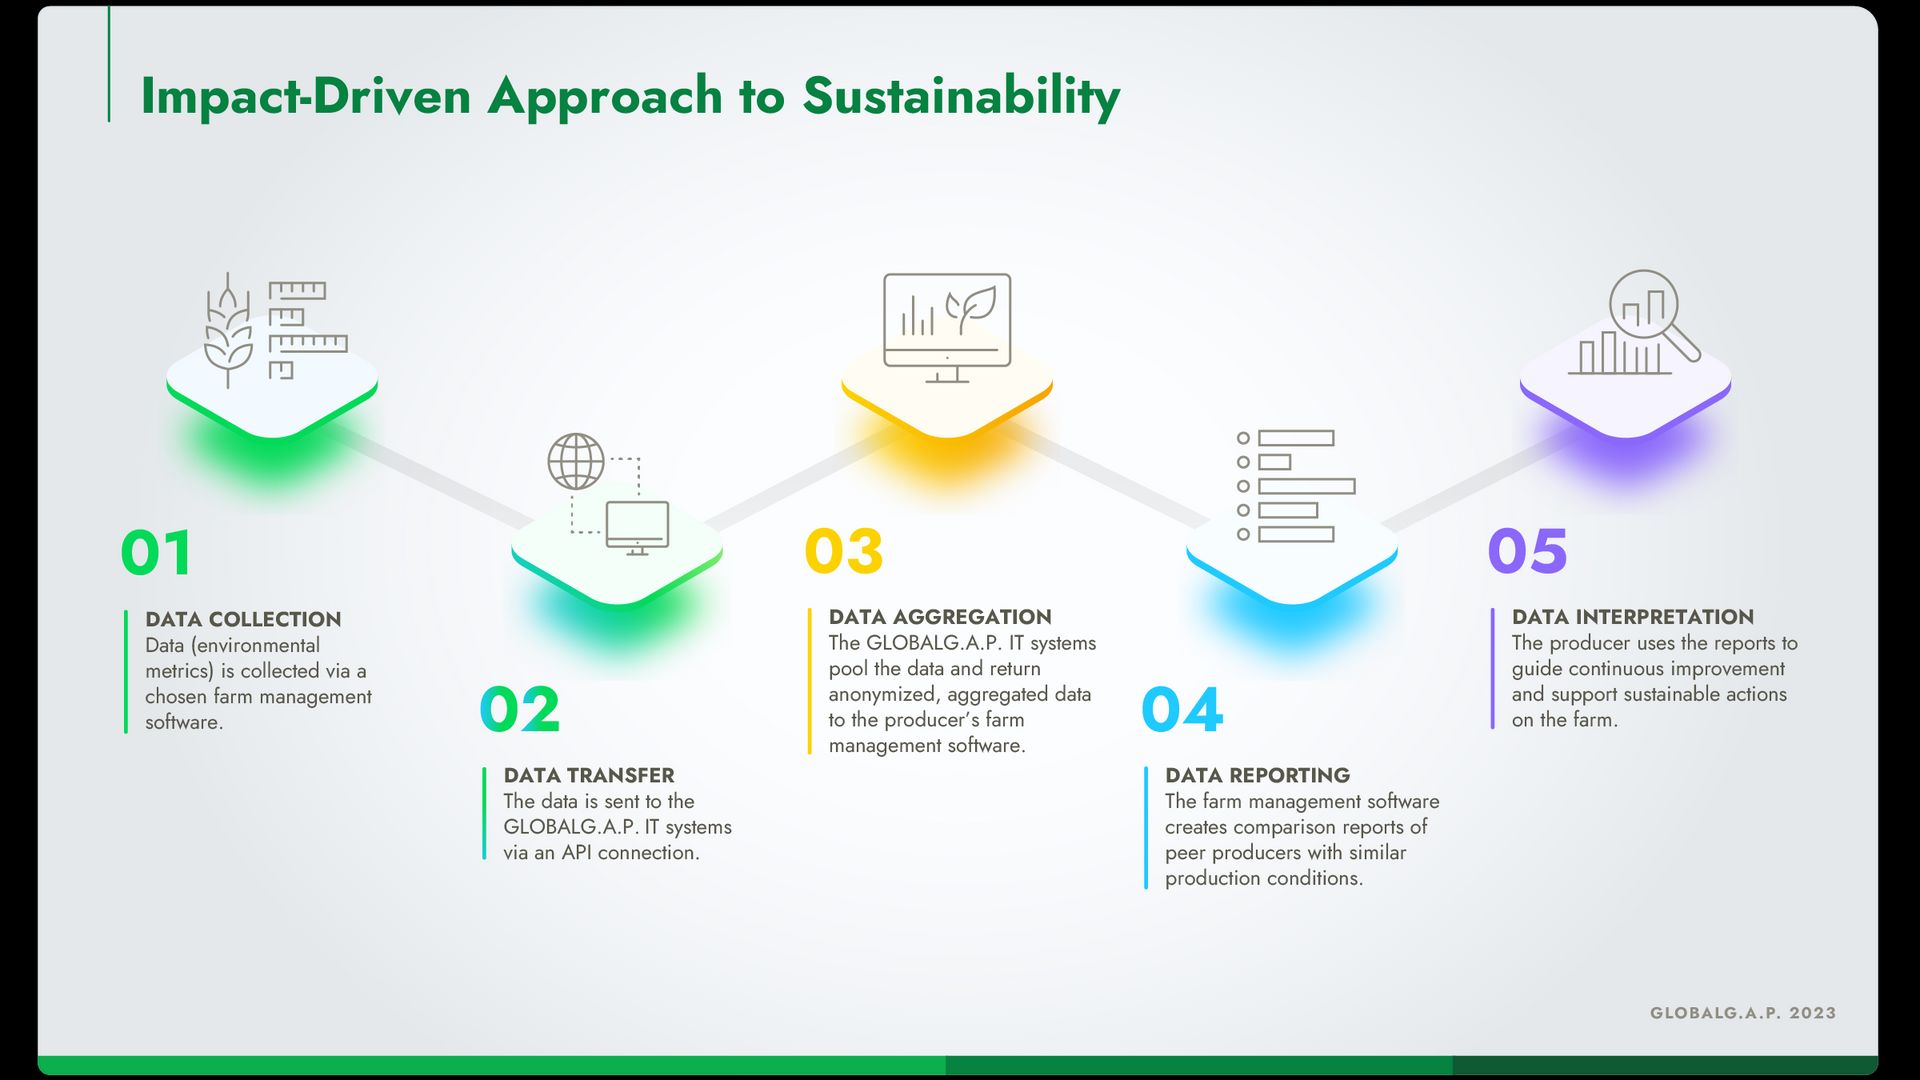 Infographic showing the five-step process of the Impact-Driven Approach to Sustainability